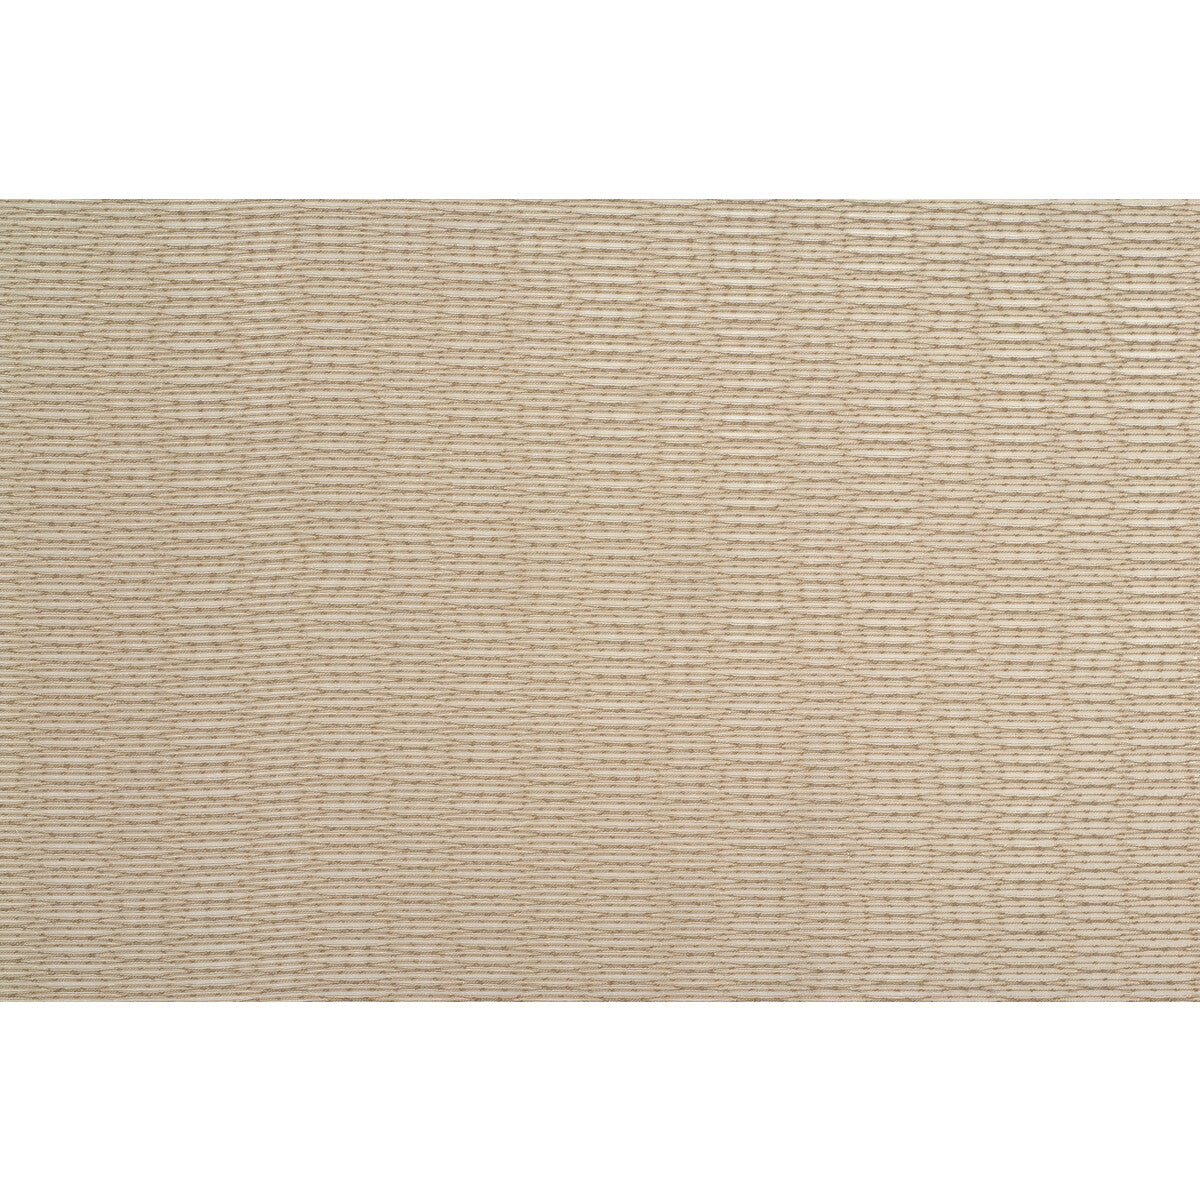 Thelma fabric in bronze color - pattern 4286.16.0 - by Kravet Contract